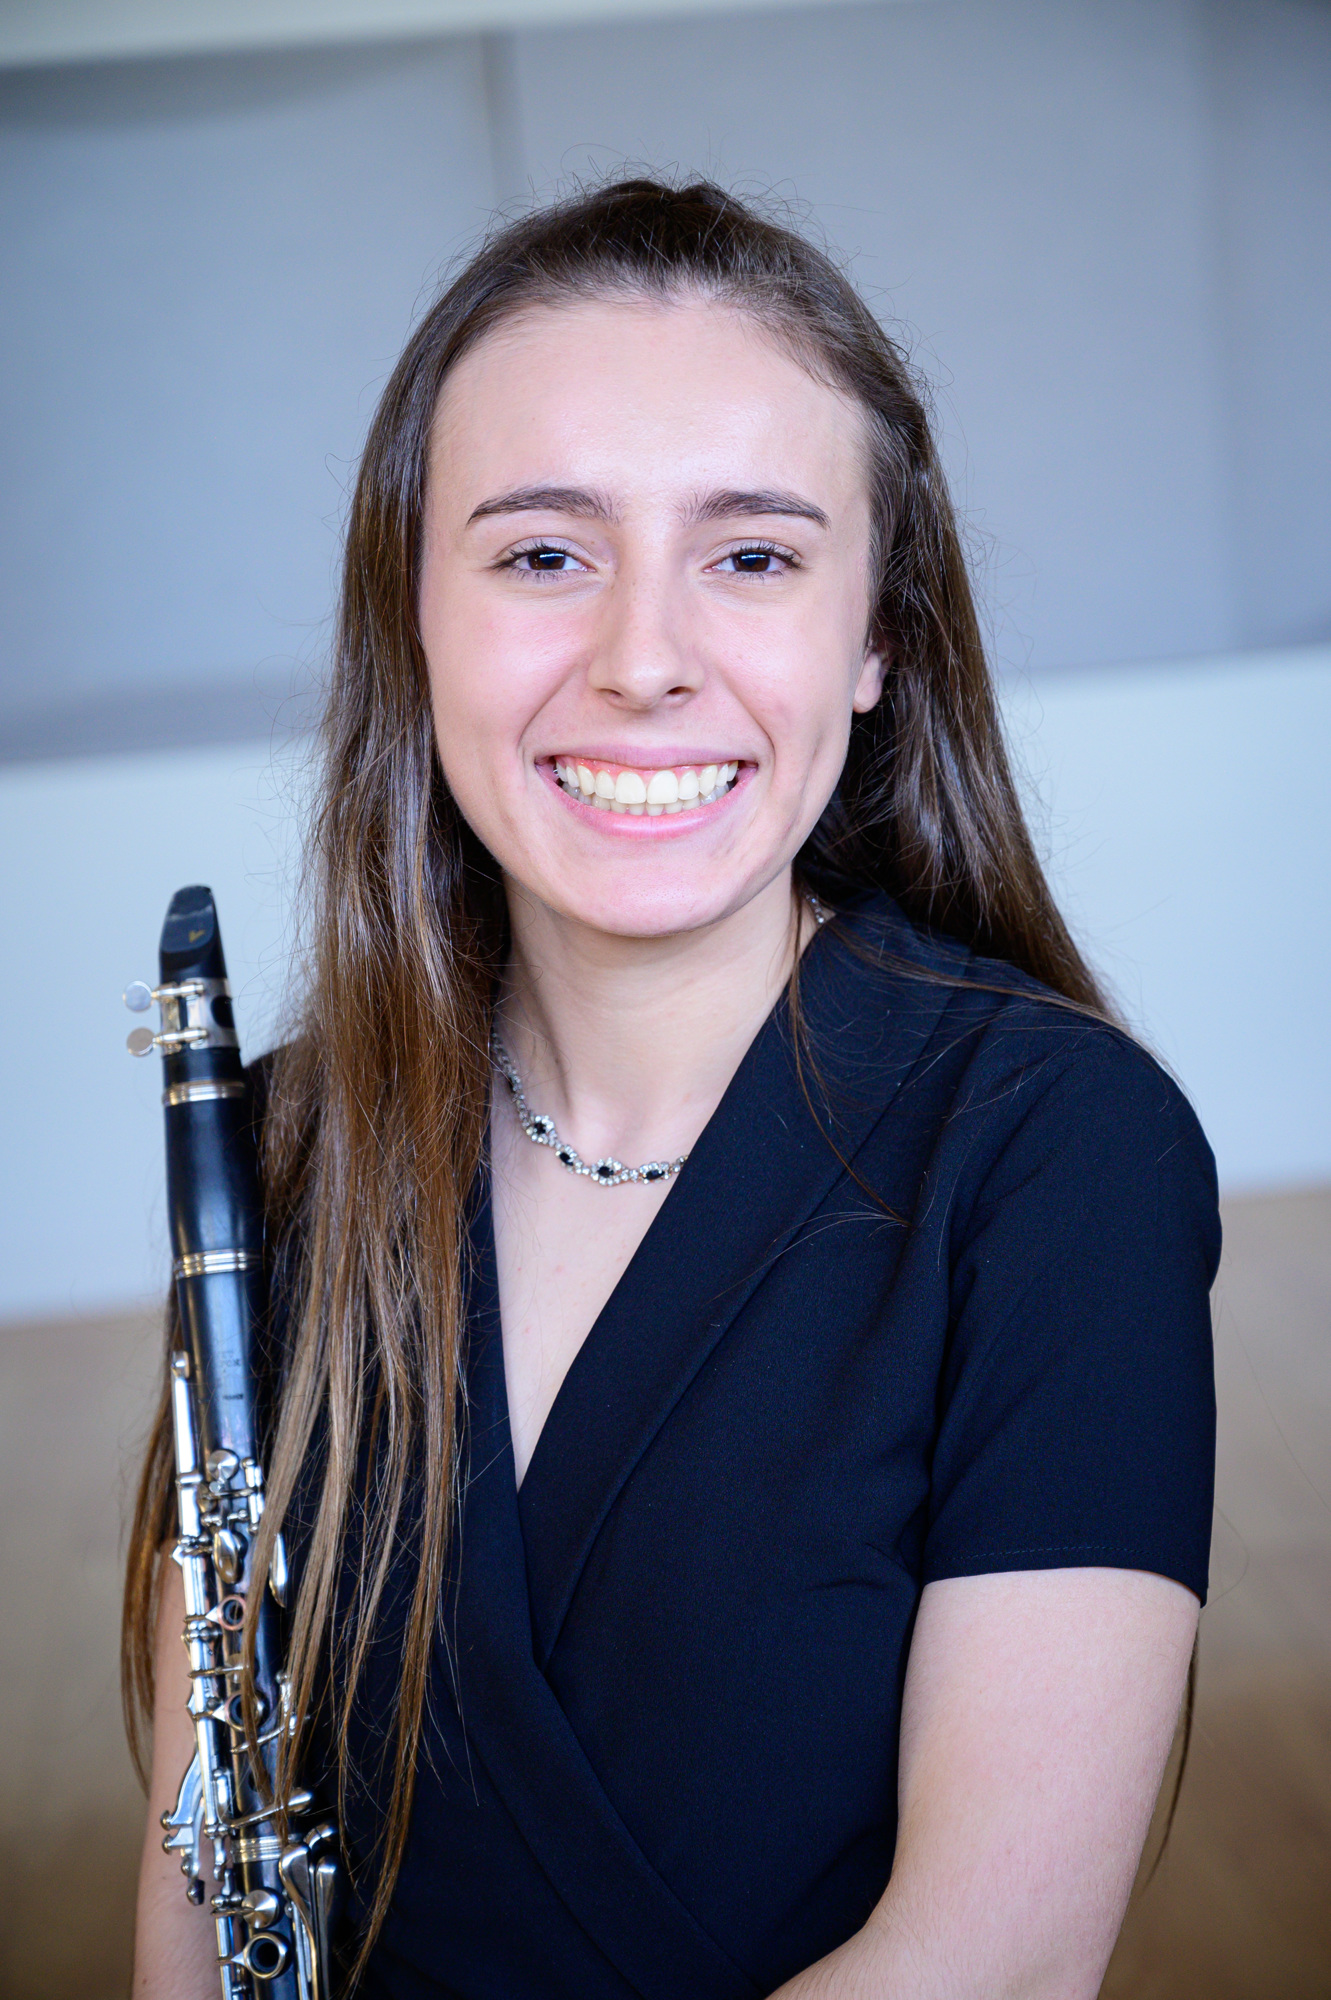 Lenora Galeziowski is looking forward to her clarinet solo with the Sarasota Orchestra as a once-in-a-lifetime experience. (Photos courtesy Sarasota Orchestra)